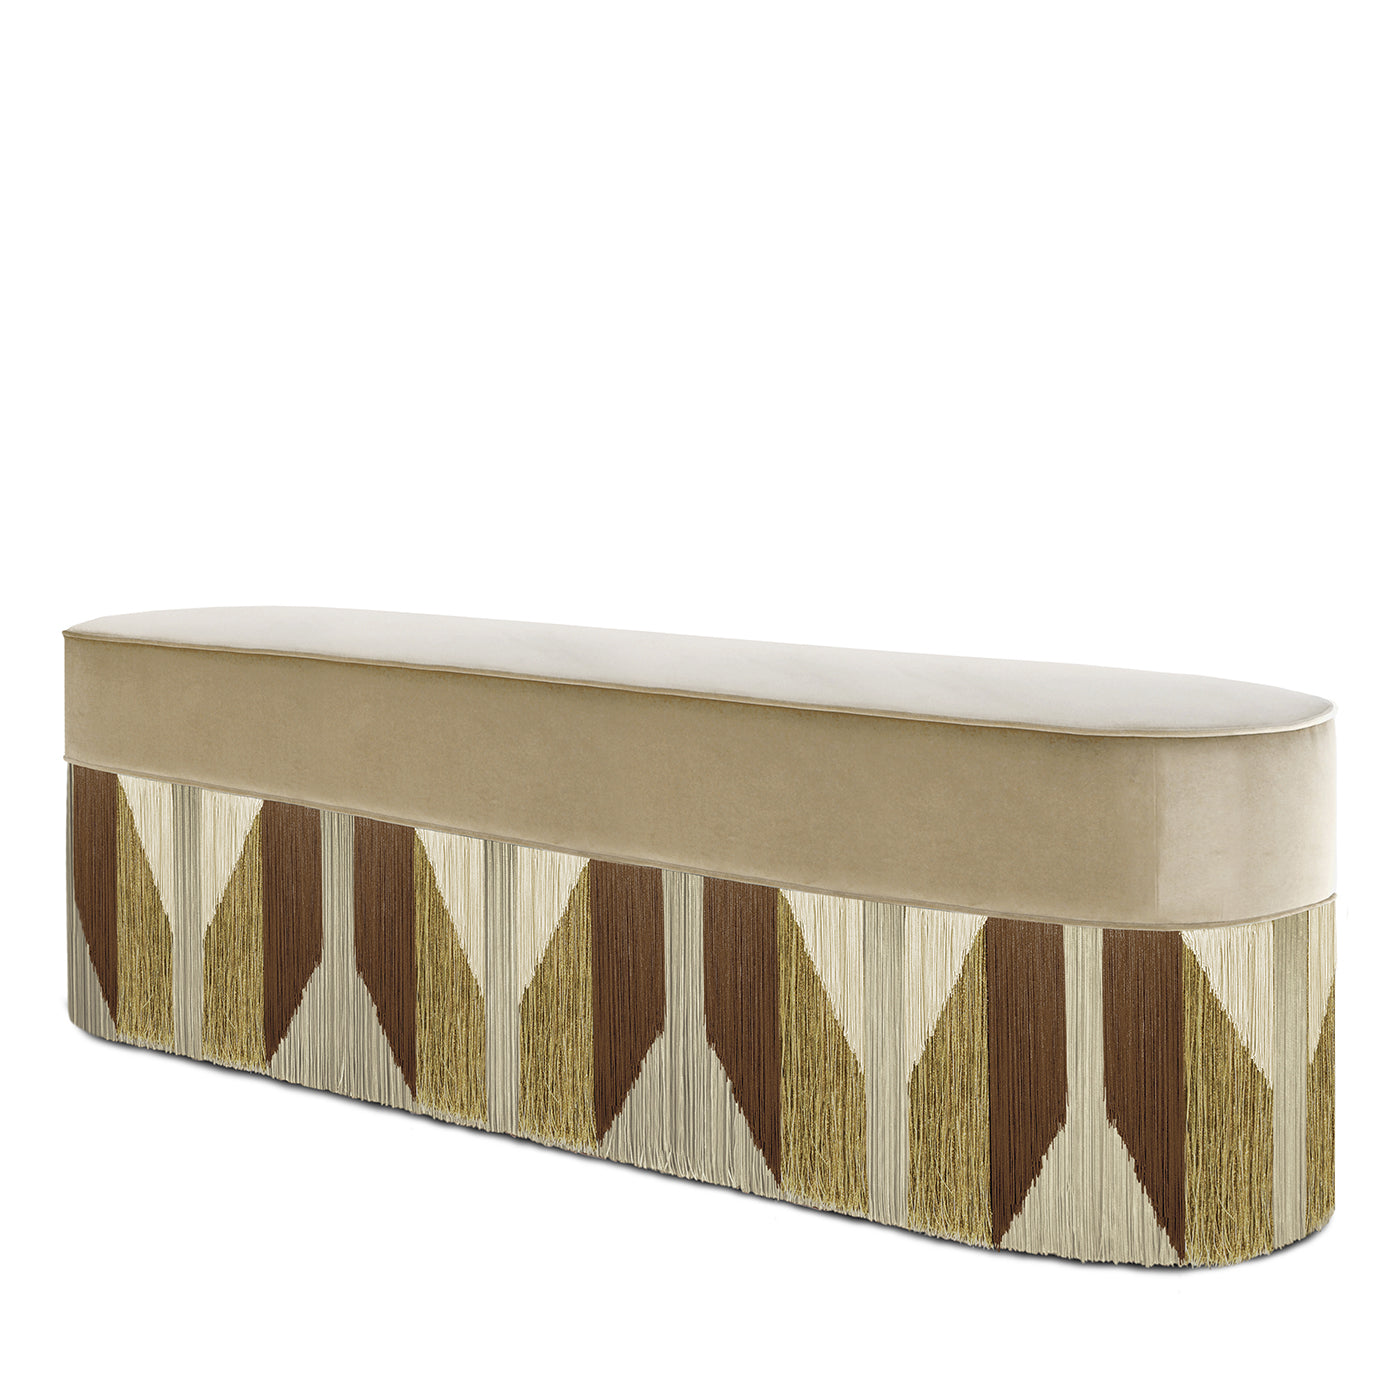 Couture Tribe Polychrome Bench #6 - Alternative view 2